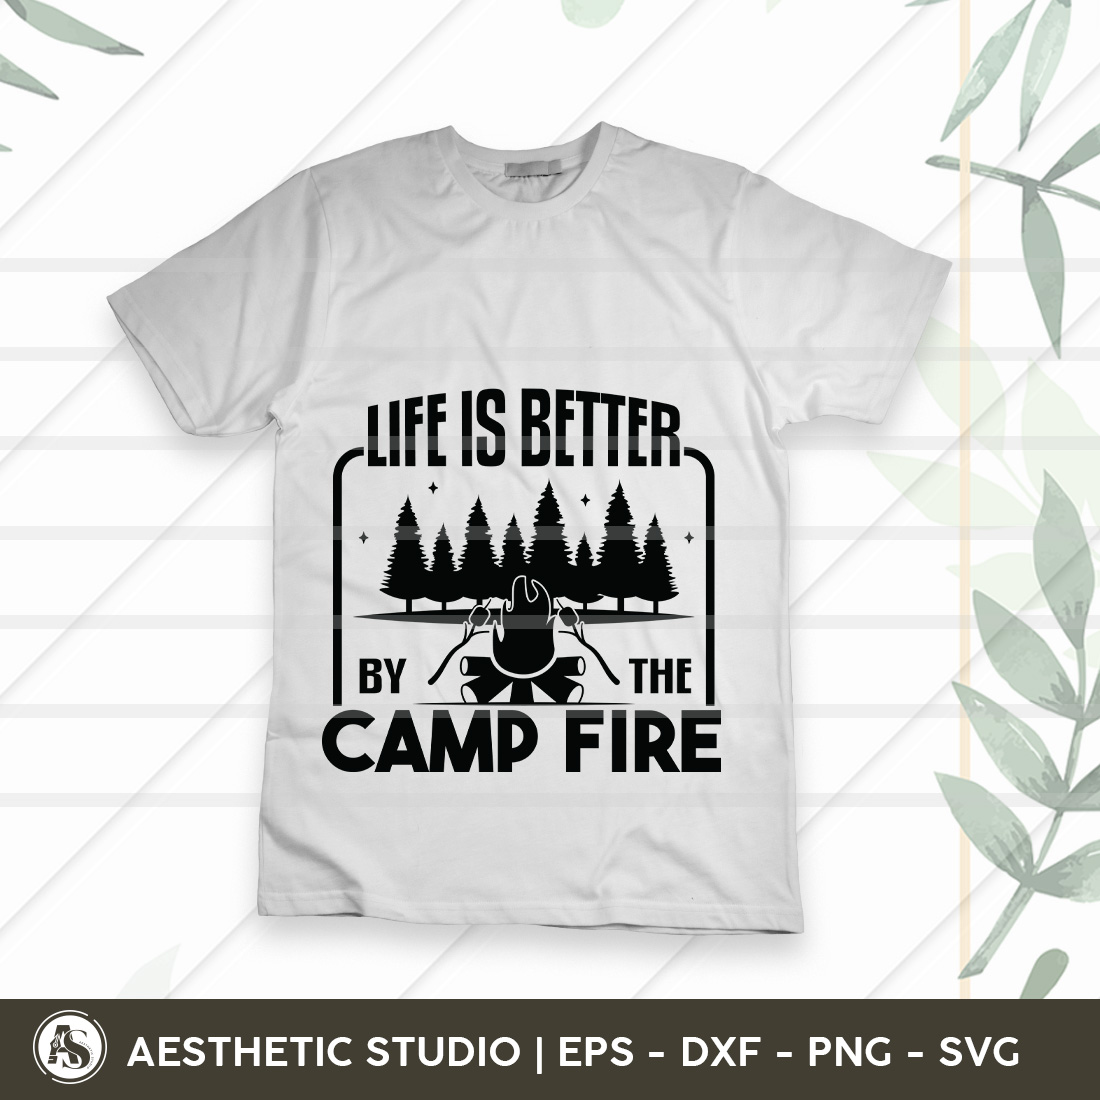 Life Is Better By The Camp Fire, Happy Campers Svg, Camper, Adventure, Camp Life, Camping Svg, Typography, Camping Quotes, Camping Cut File, Funny Camping, Camping T-shirt Design, Svg, Eps, Dxf, Png, Cut file preview image.